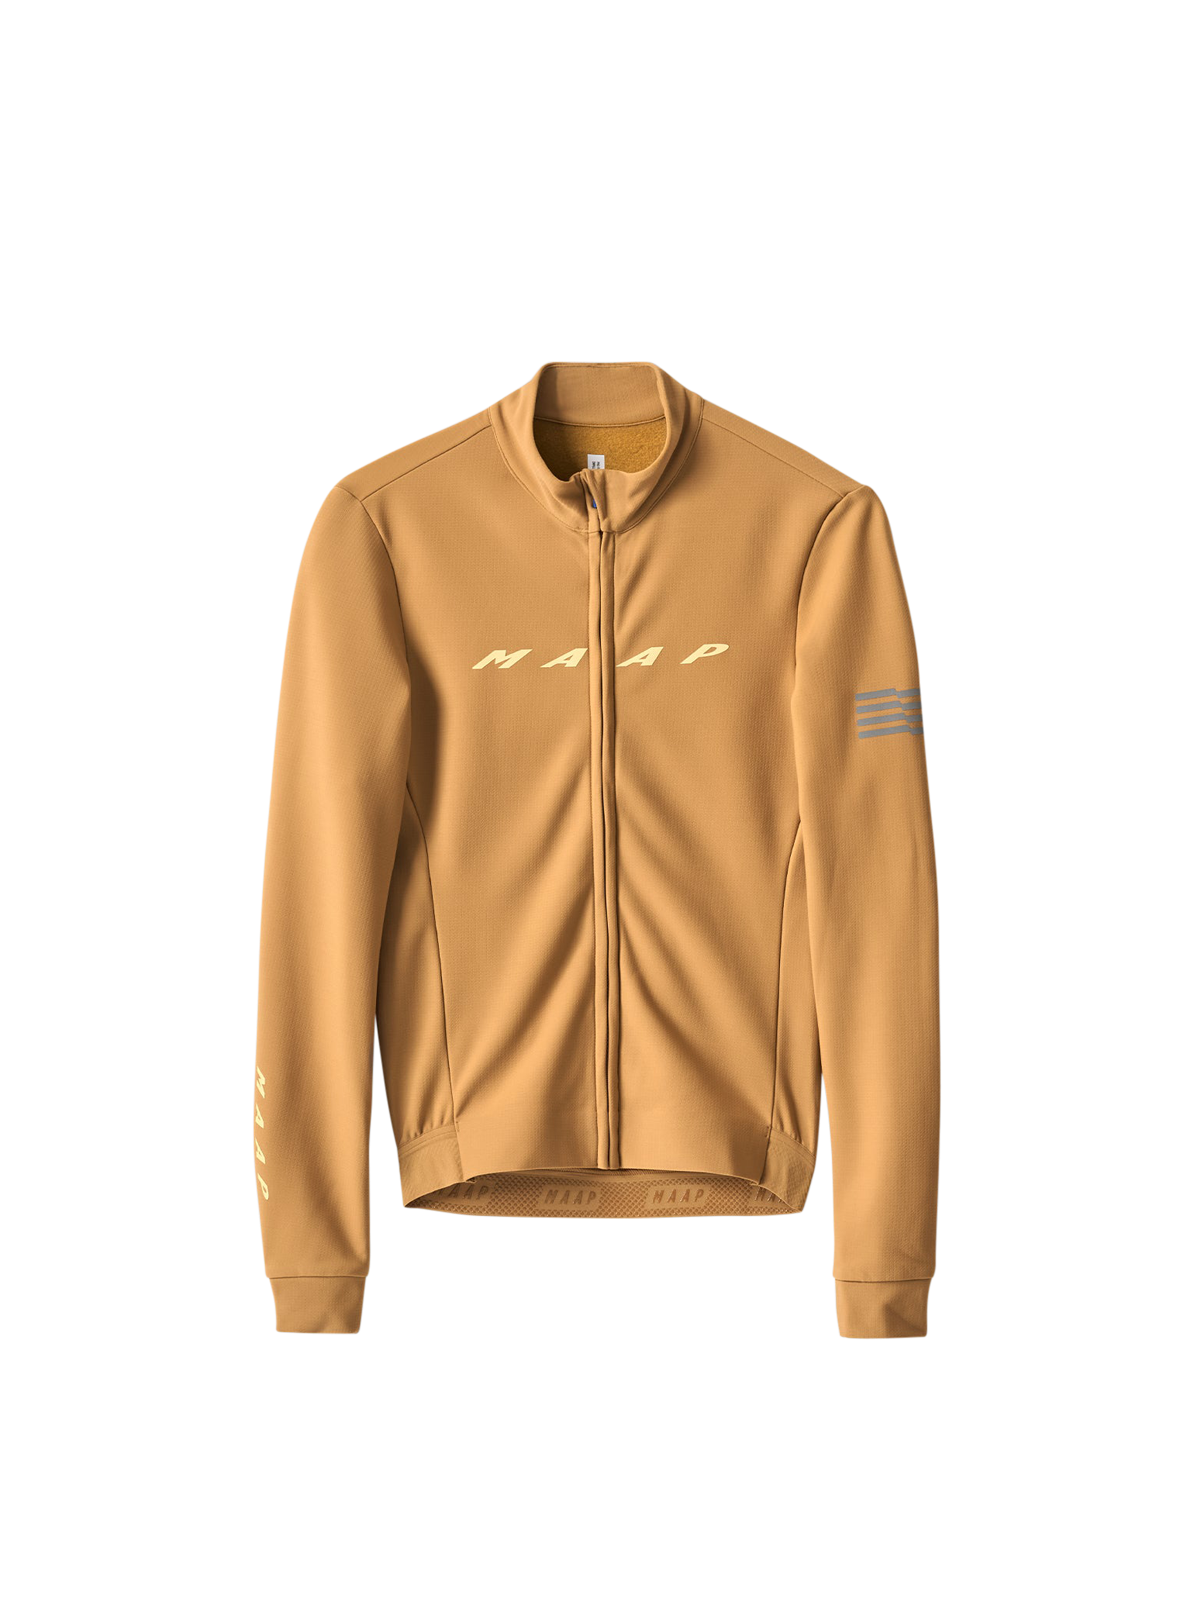 Evade Thermal LS Jersey 2.0